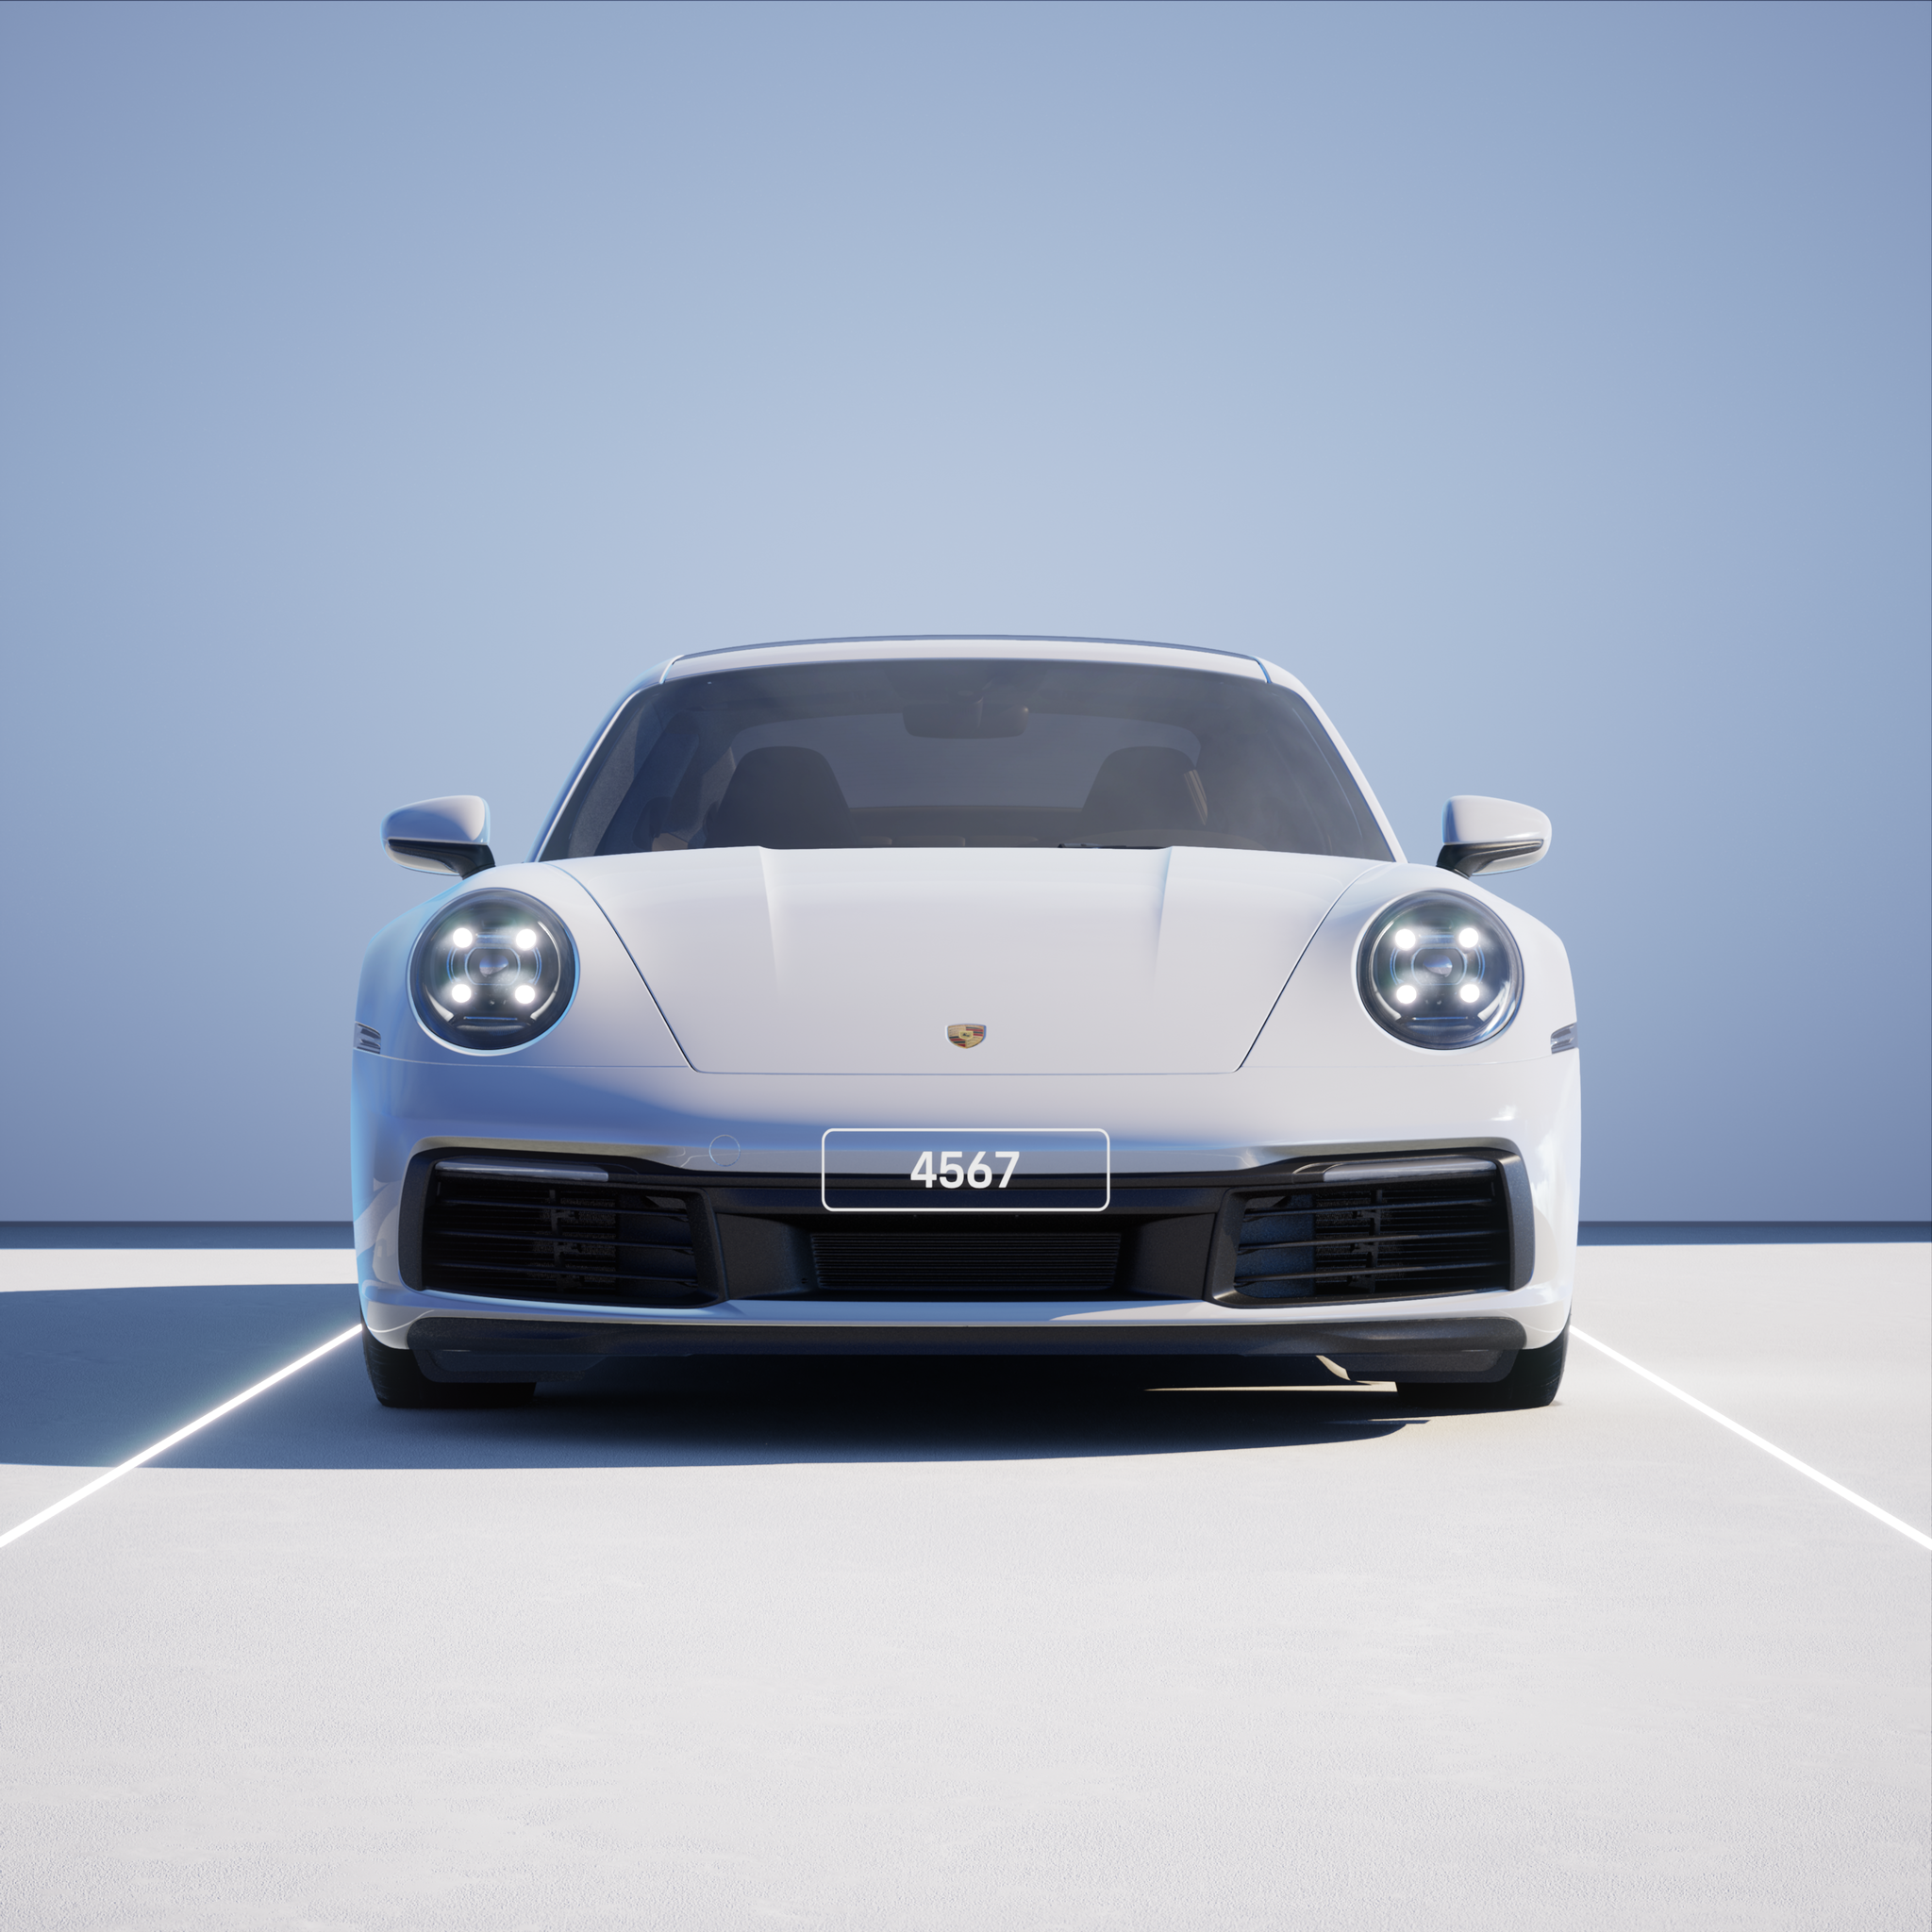 The PORSCHΞ 911 4567 image in phase